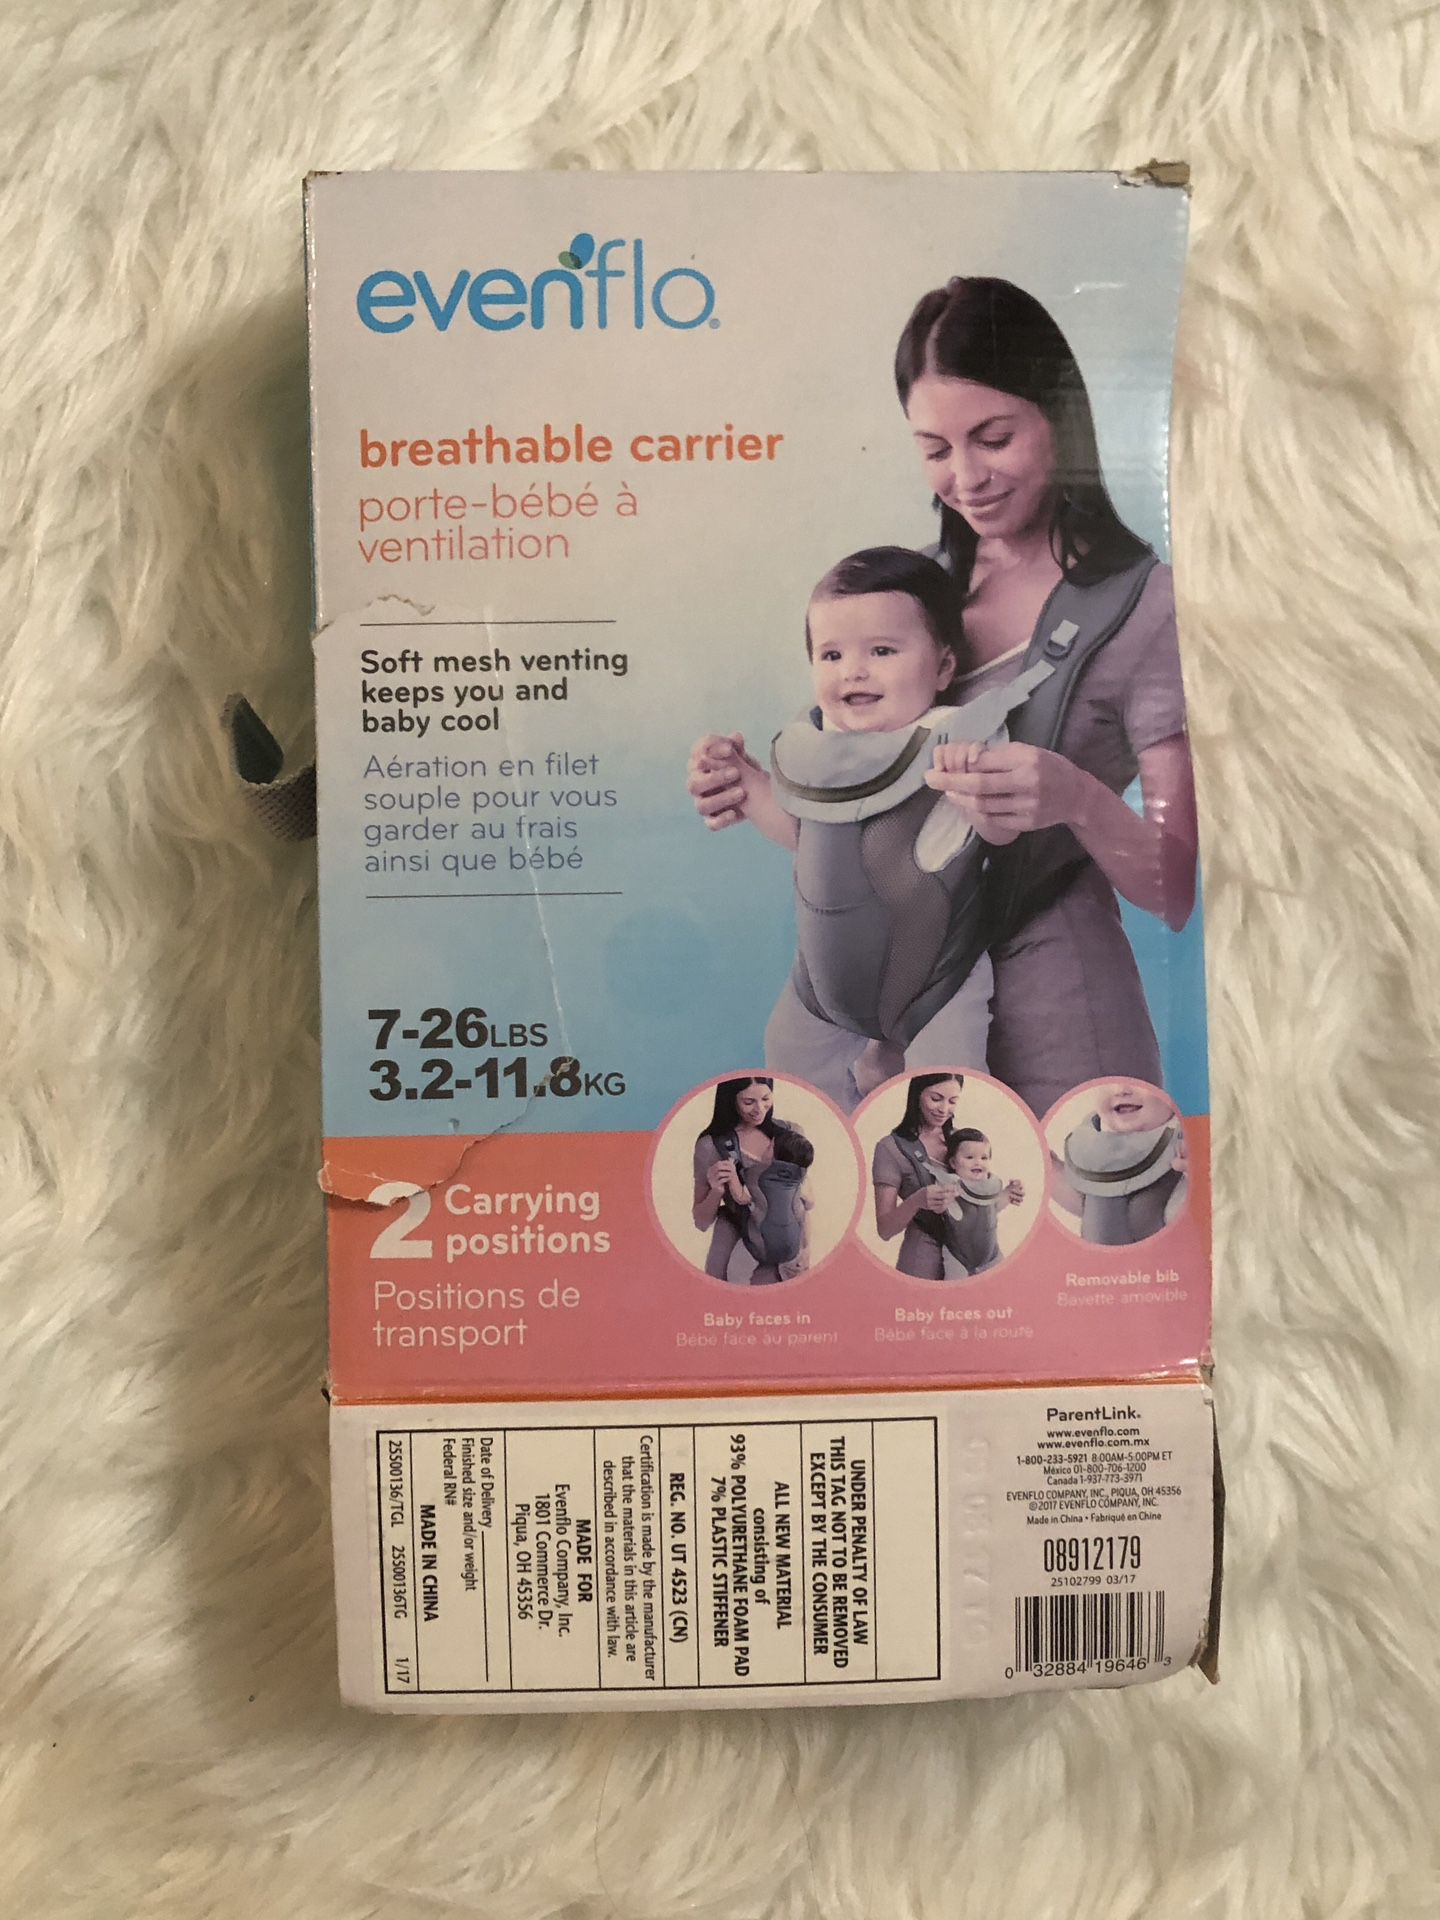 evenflo Breathable Carrier with 2 carrying positions